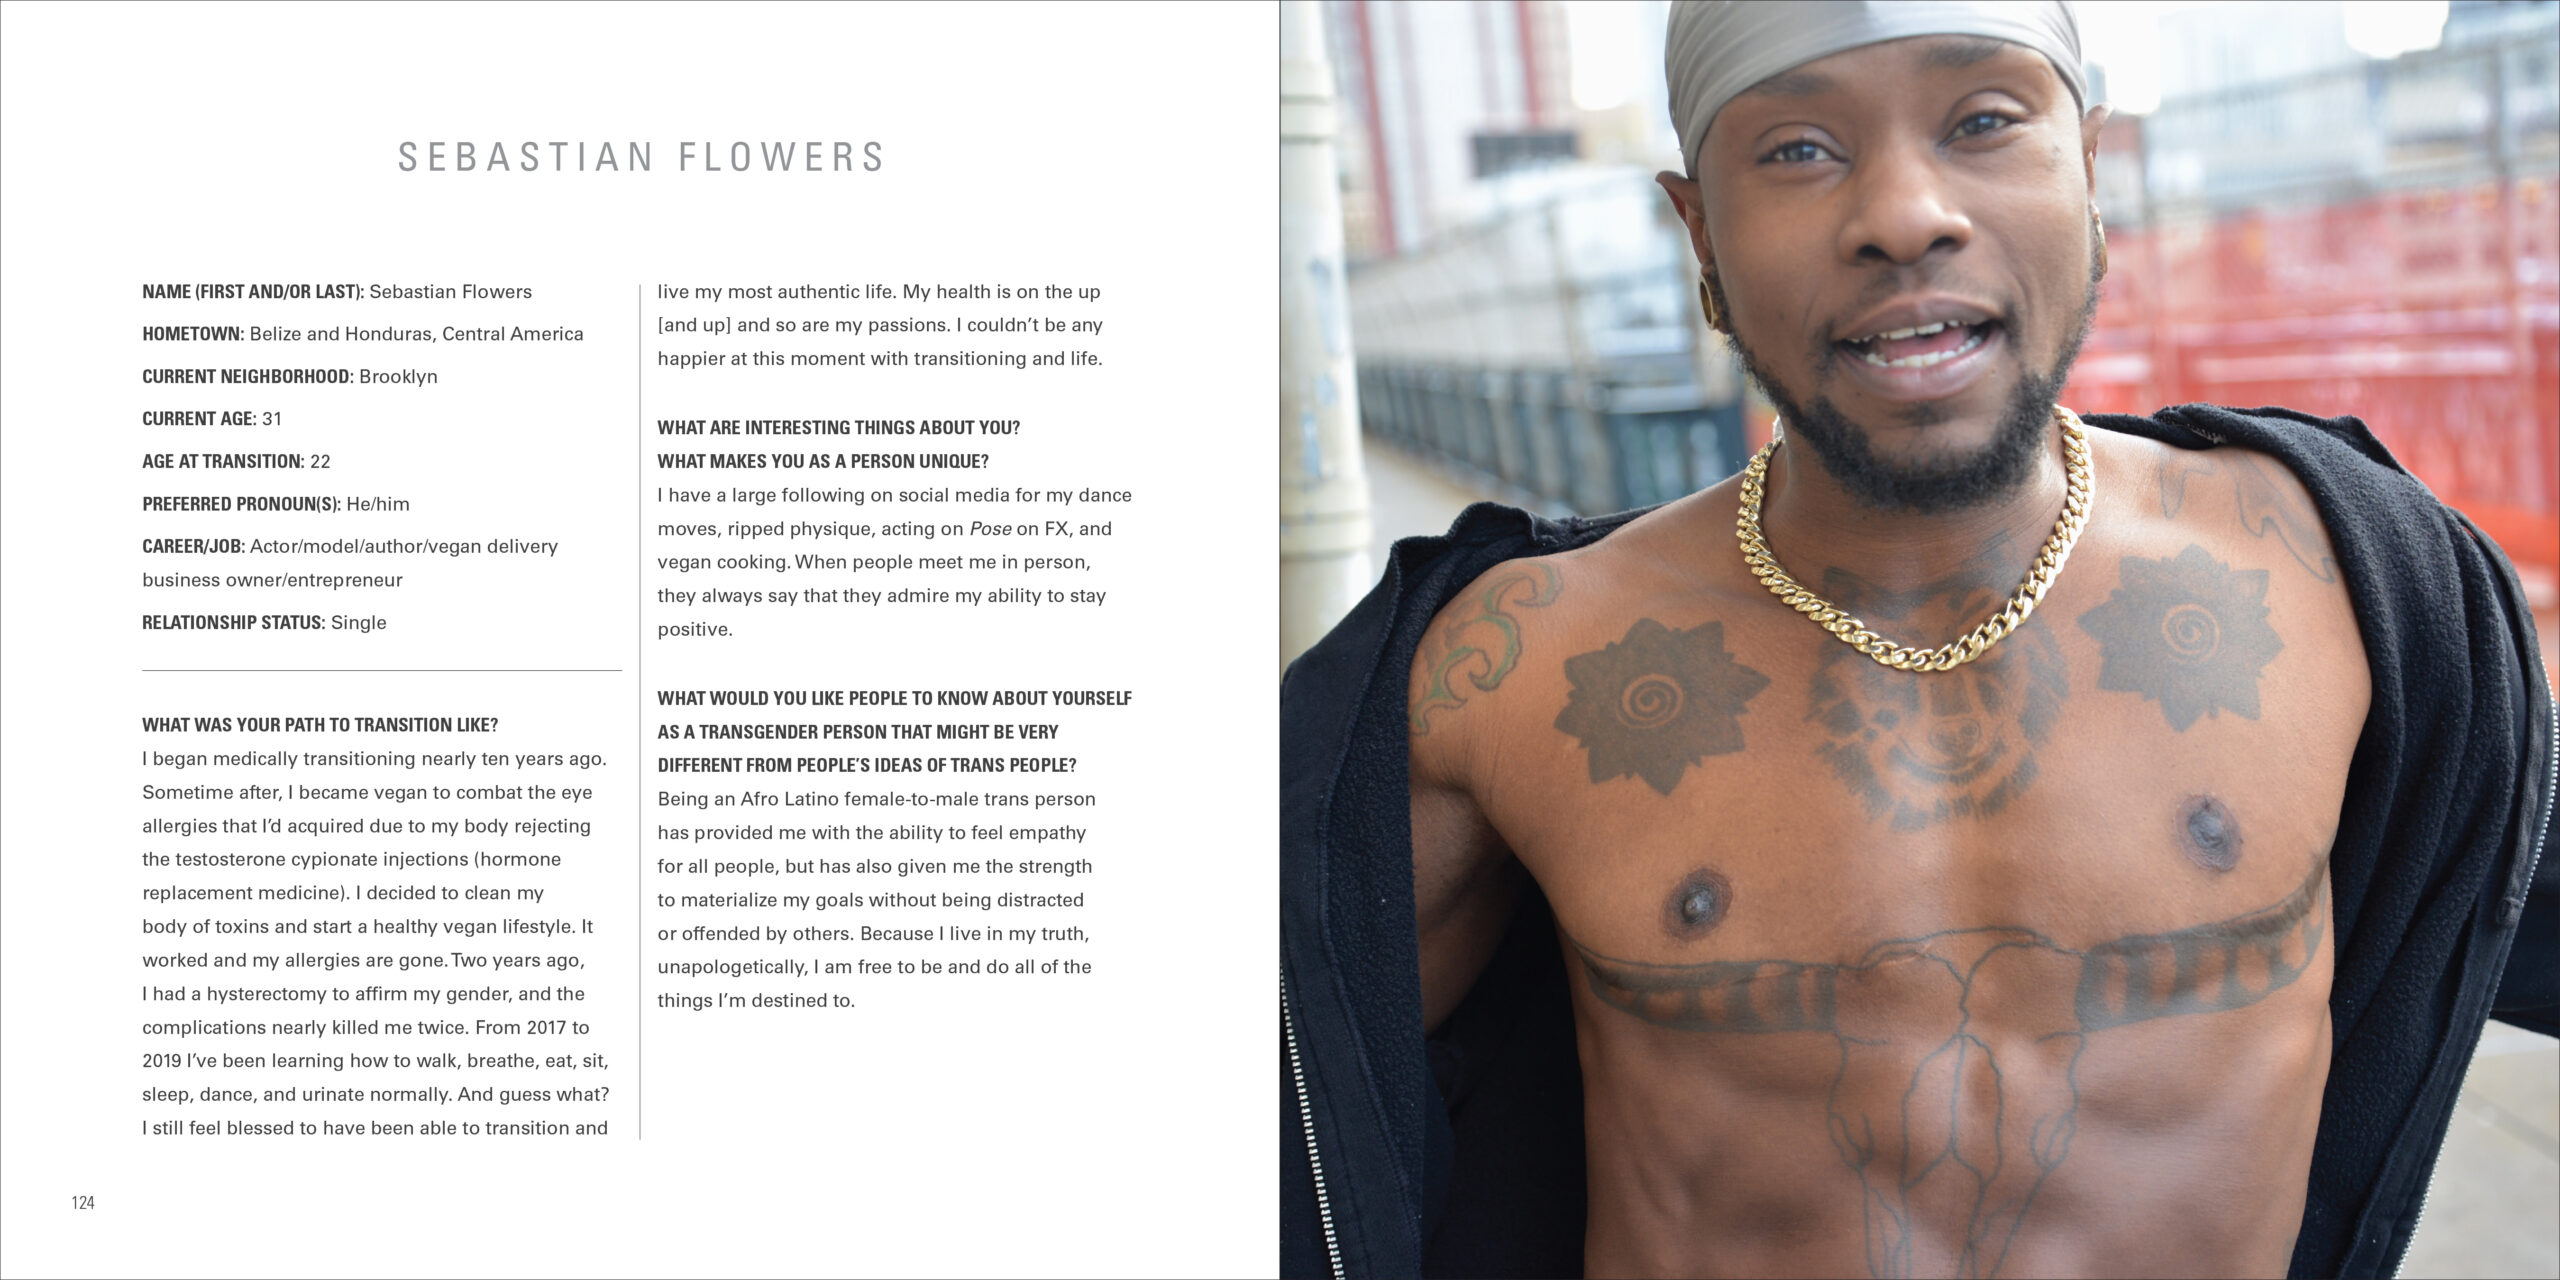 A photograph and interview with Sebastian Flowers featured in Trans New York by Peter Bussian (Photo Credit: Apollo Publishers)